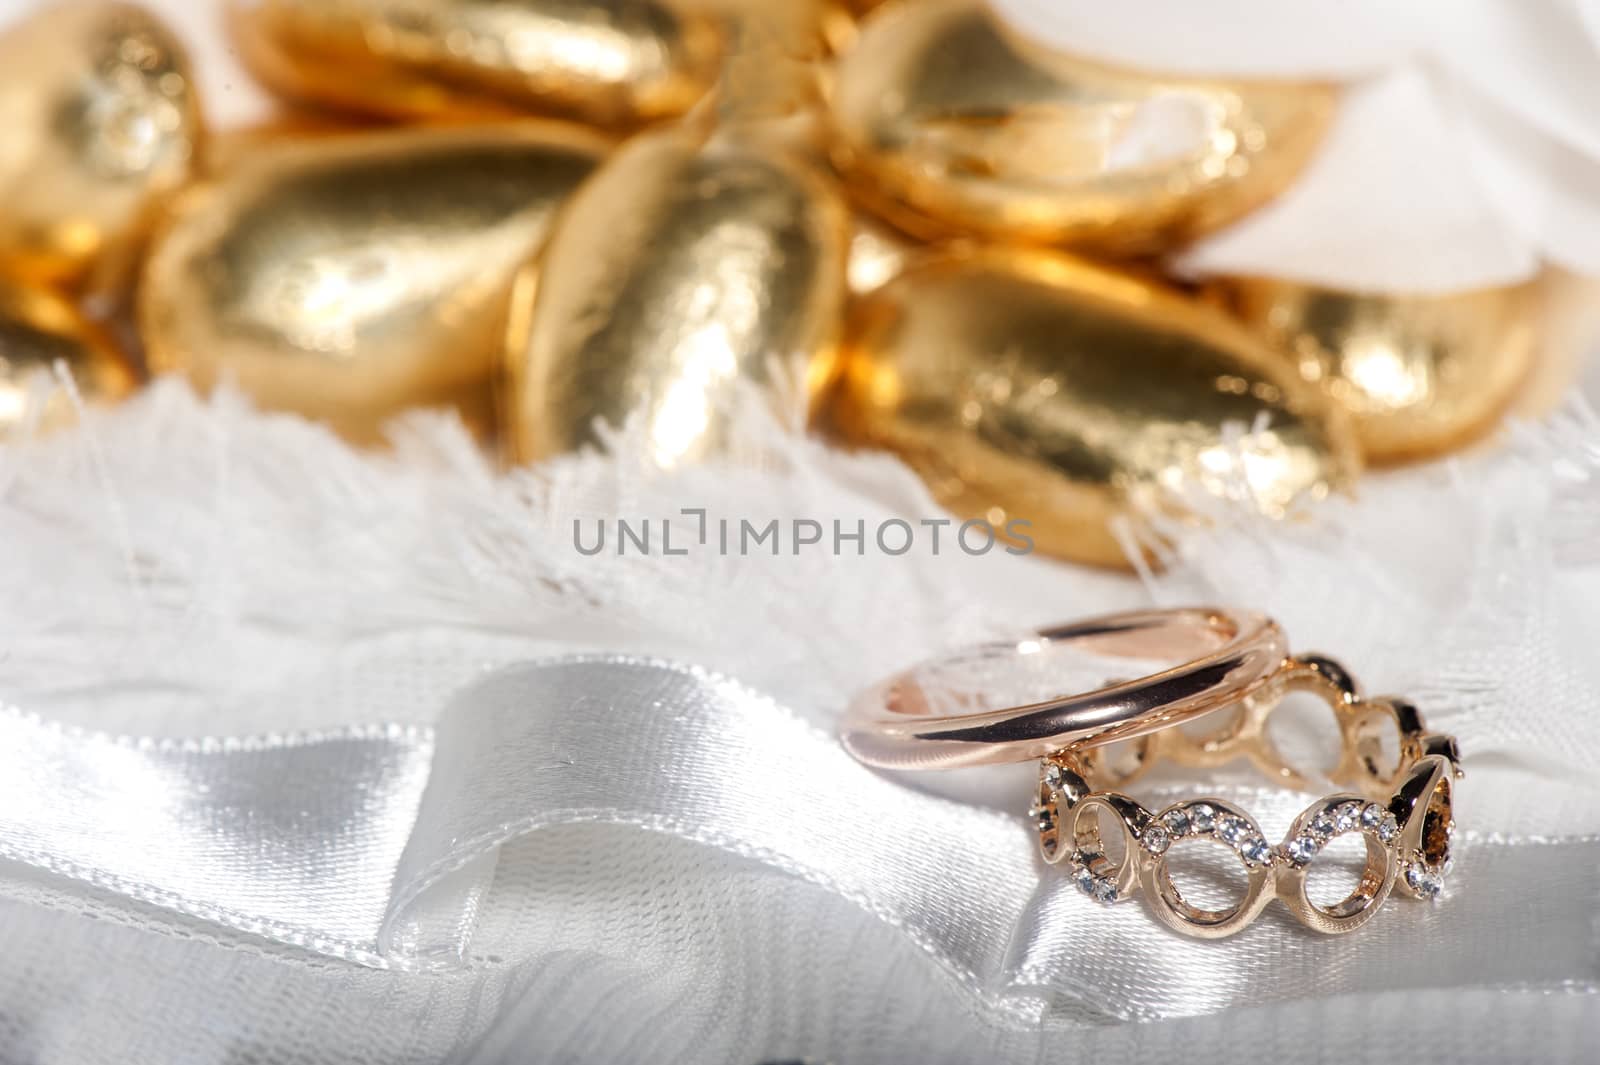  wedding rings on colorful fabric  by carla720